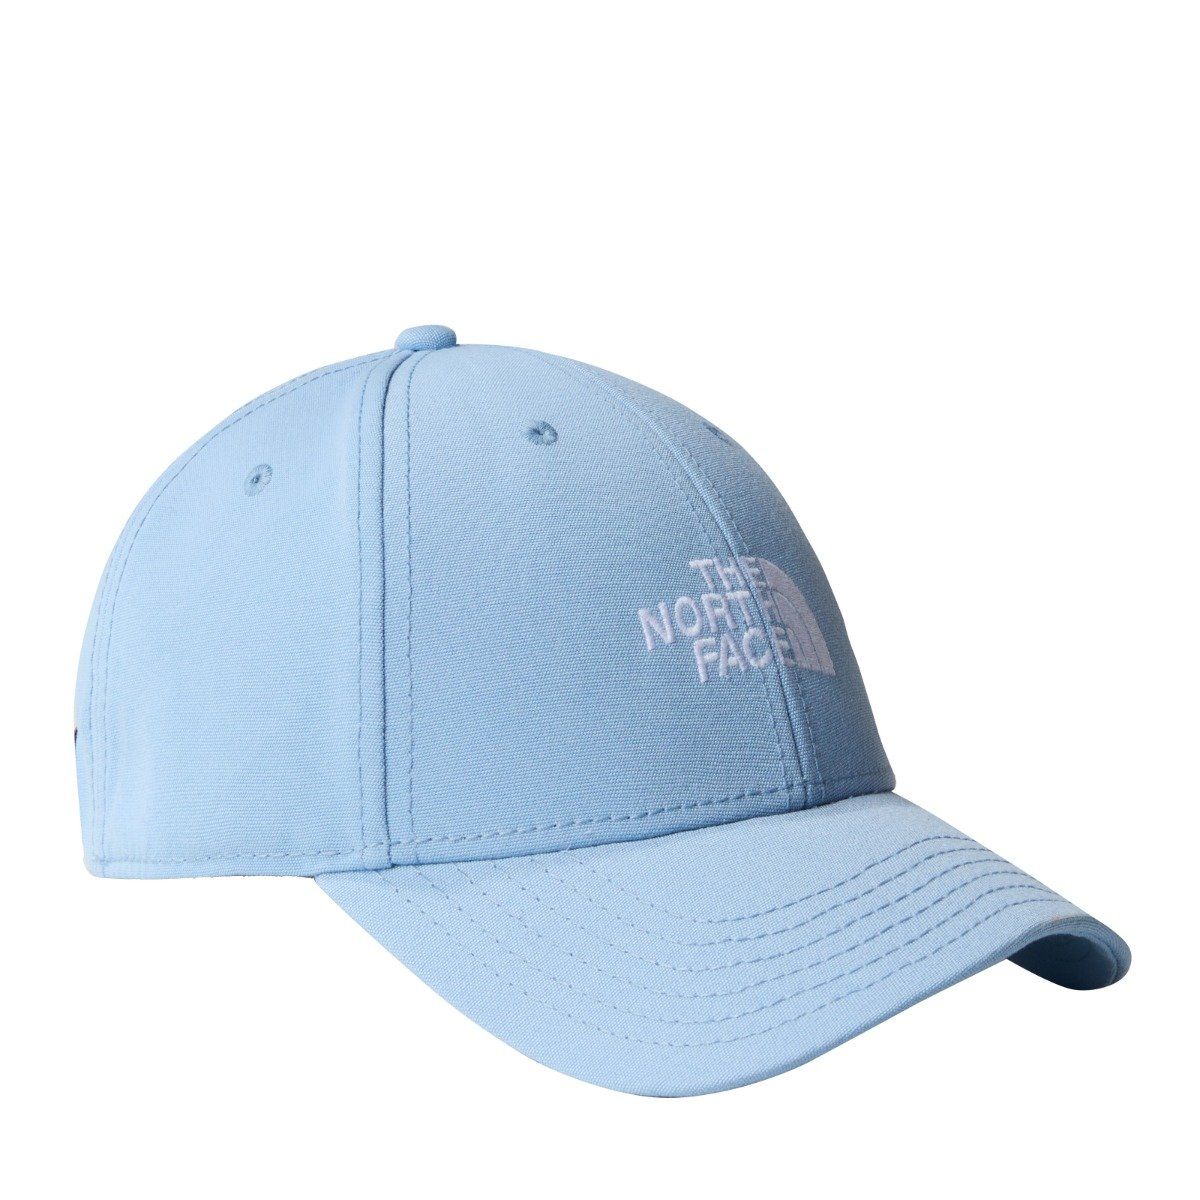 The North Face - 66 Classic Hat